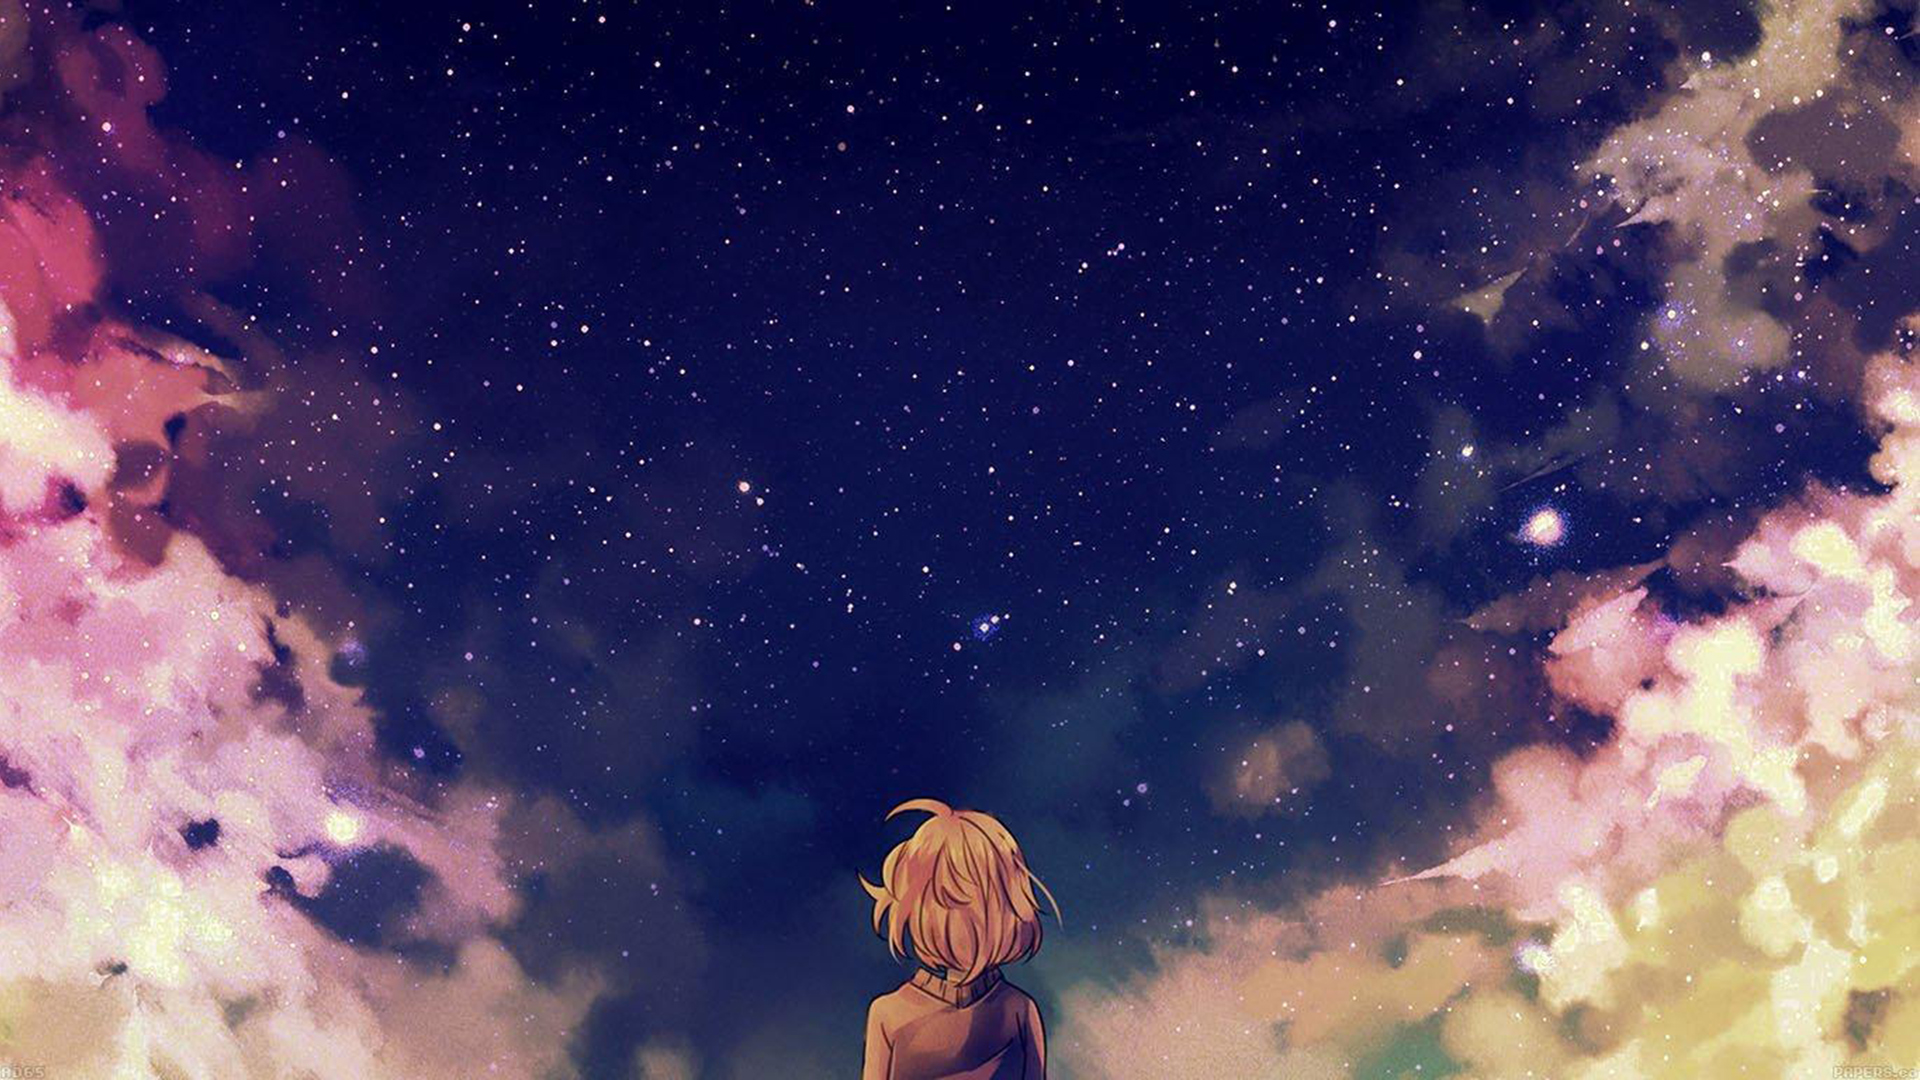 A collection of the top 68 anime laptop wallpapers and backgrounds  available for download for free   Anime backgrounds wallpapers Anime  wallpaper Anime scenery